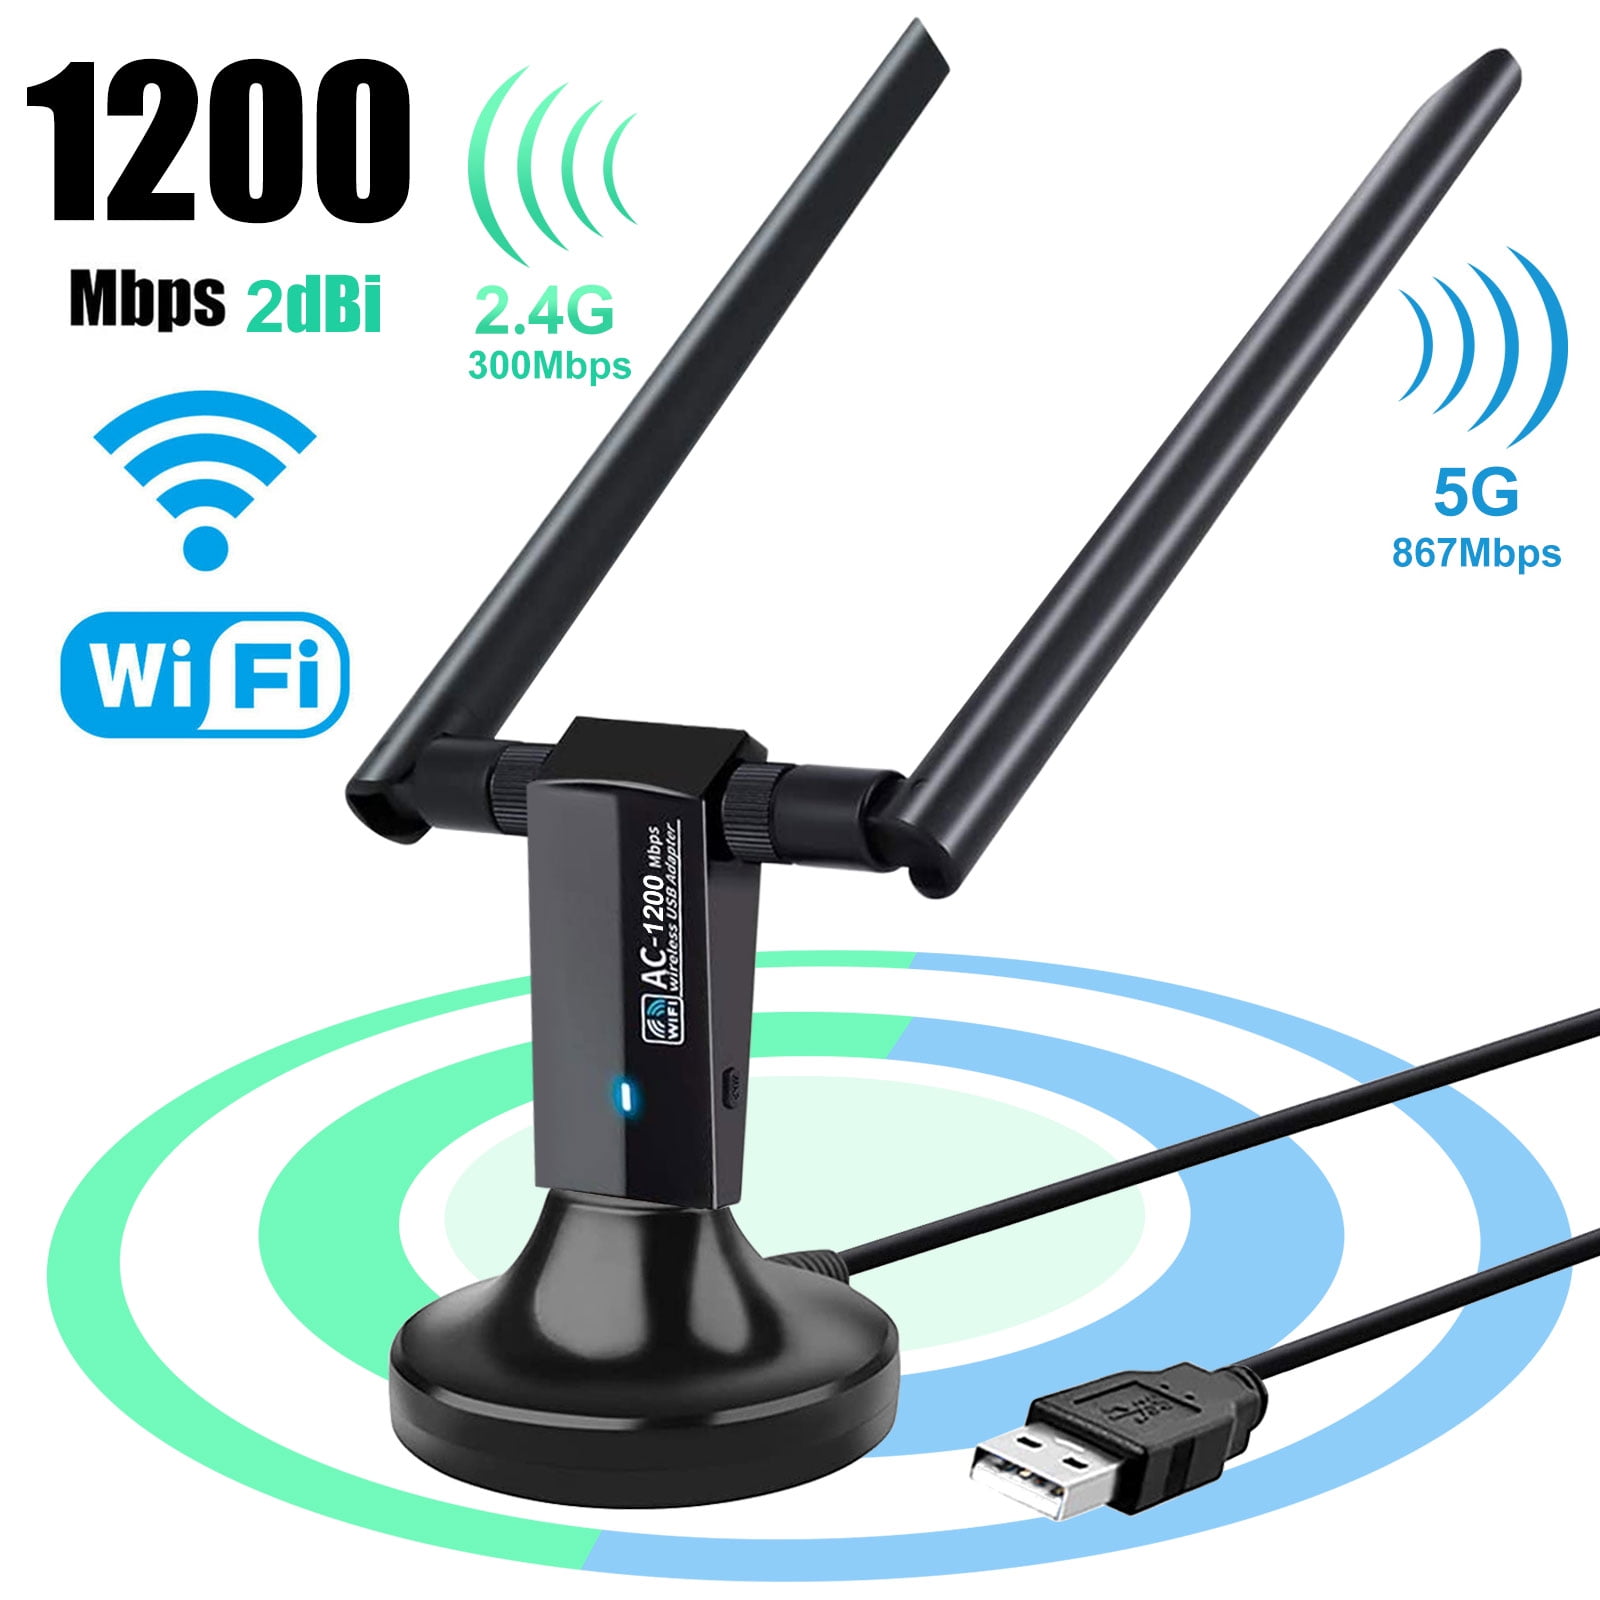 7/8/10 Mac KuWFi WiFi Adapter 1200Mbps USB3.0 Cable Dual 5dBi Antenna Ethernet Dongle Support Windows XP/Vista 